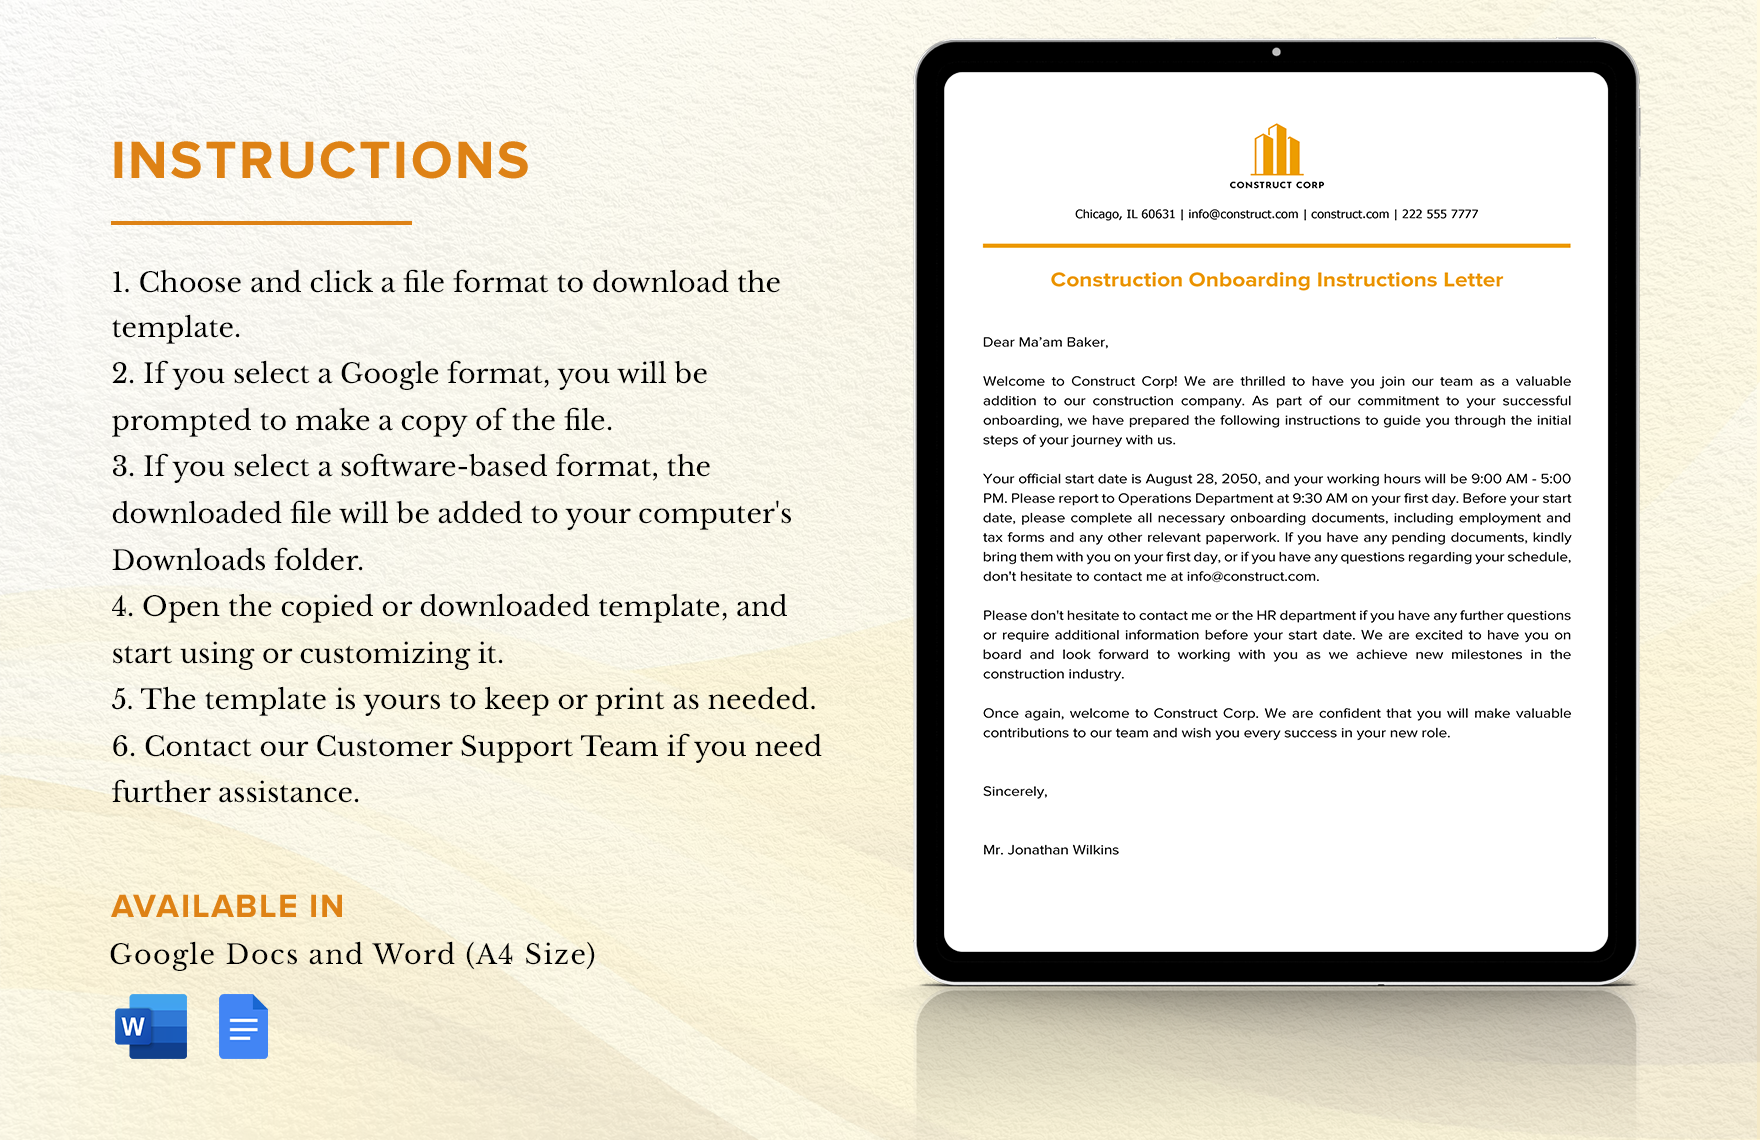 Construction Onboarding Instructions Letter Template